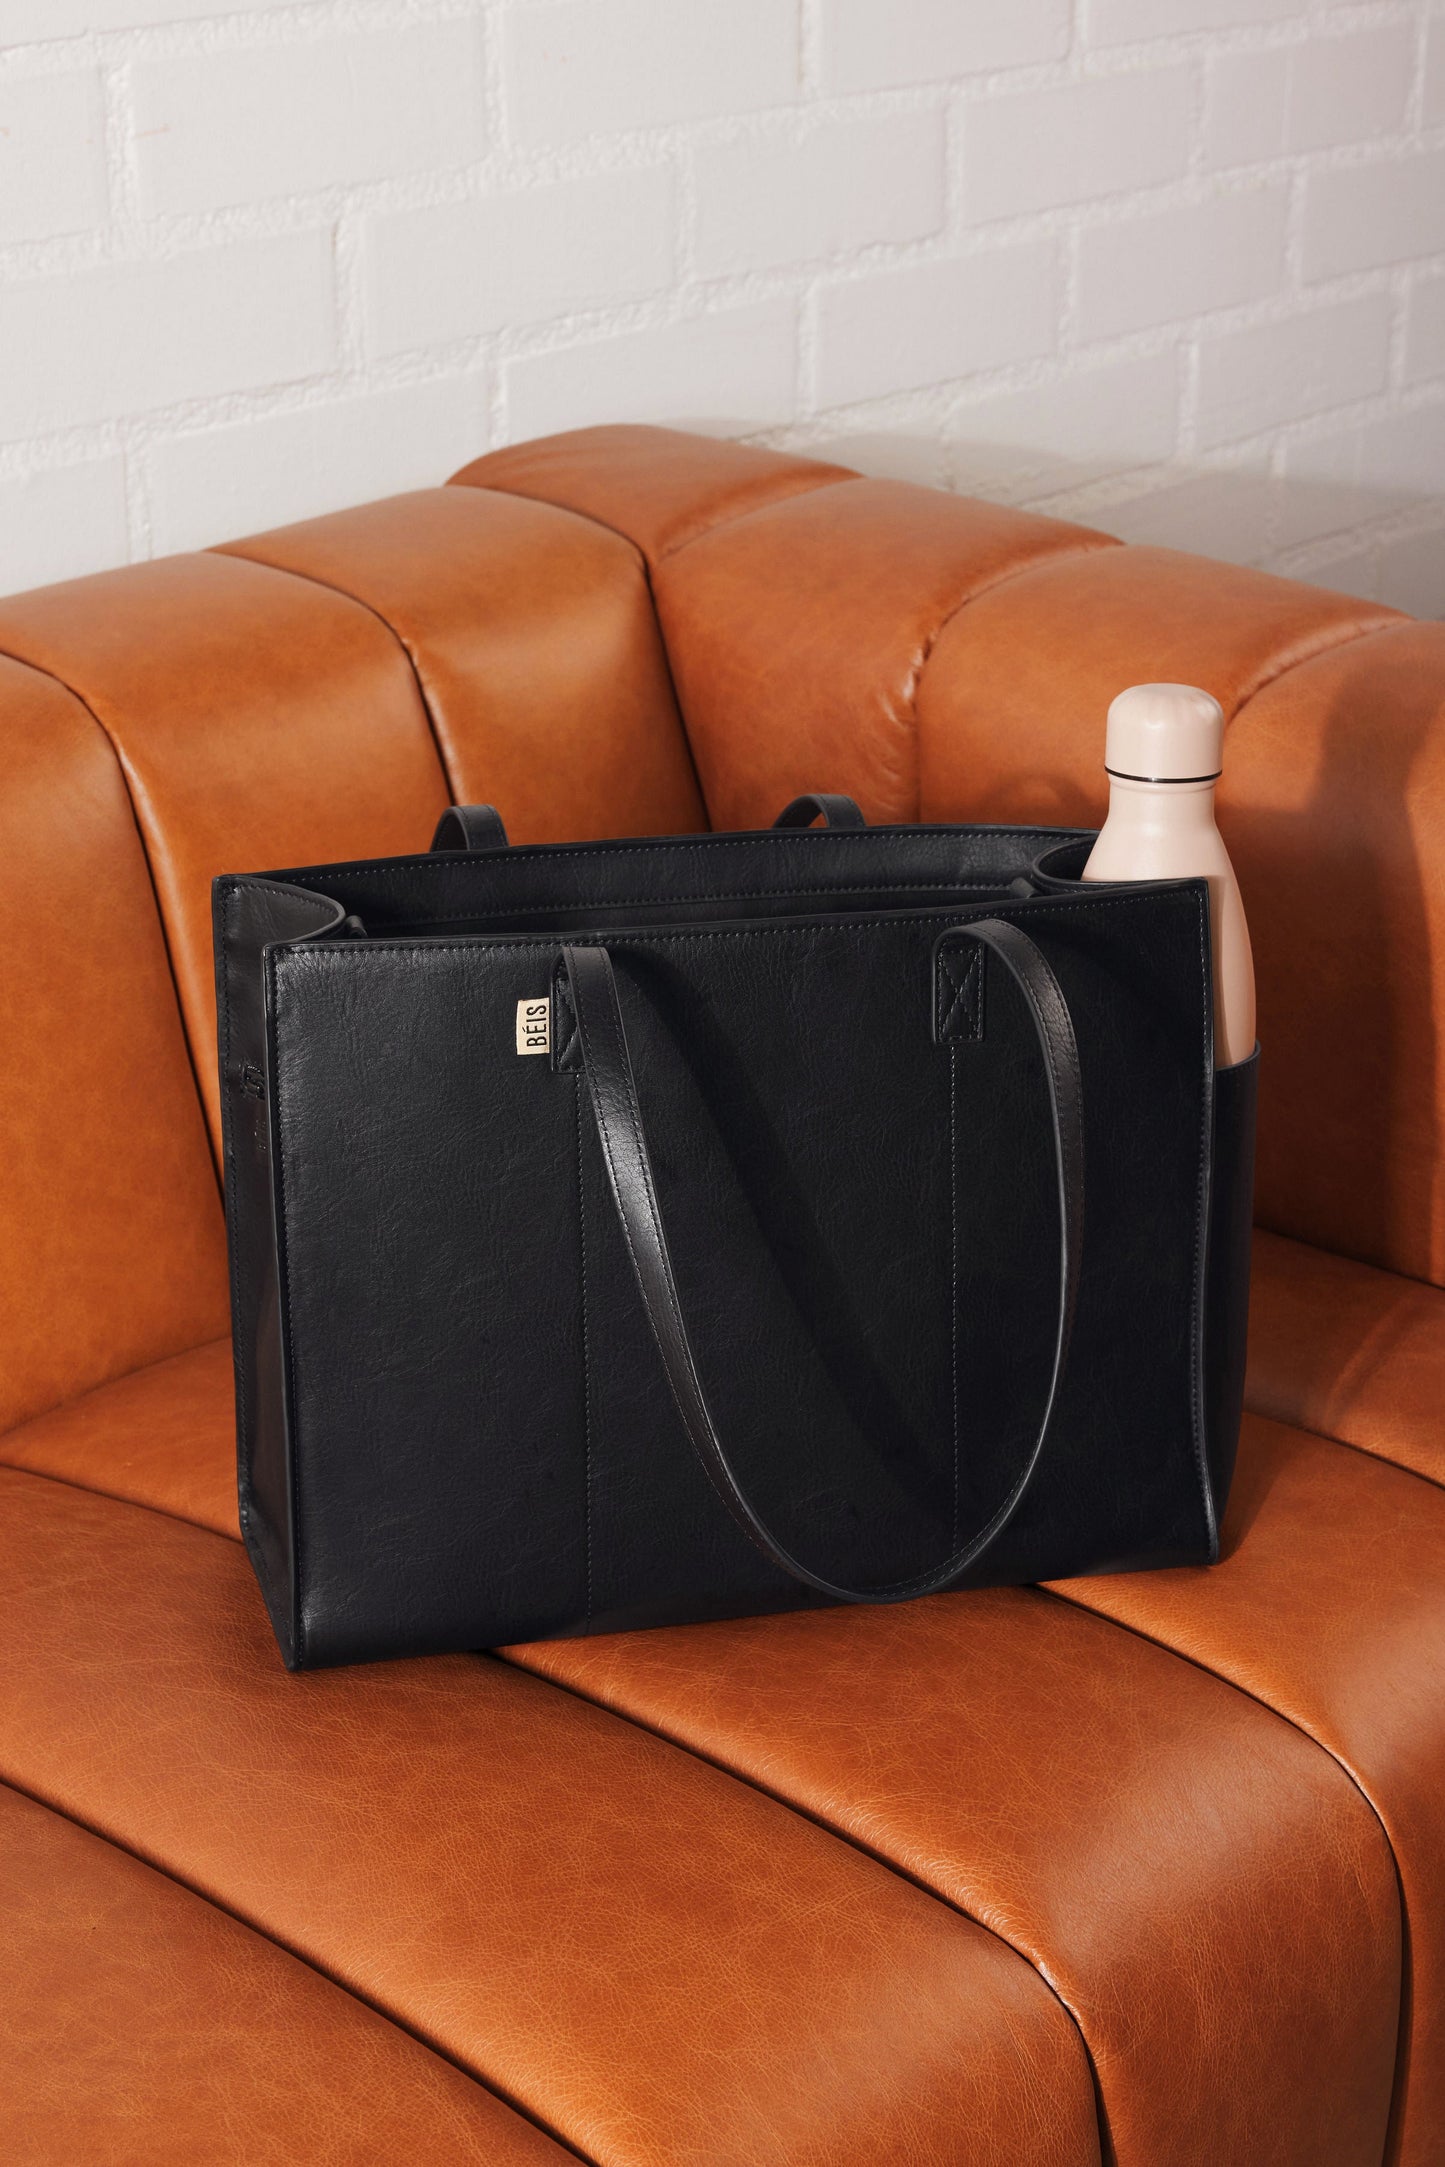 The Work Tote in Black